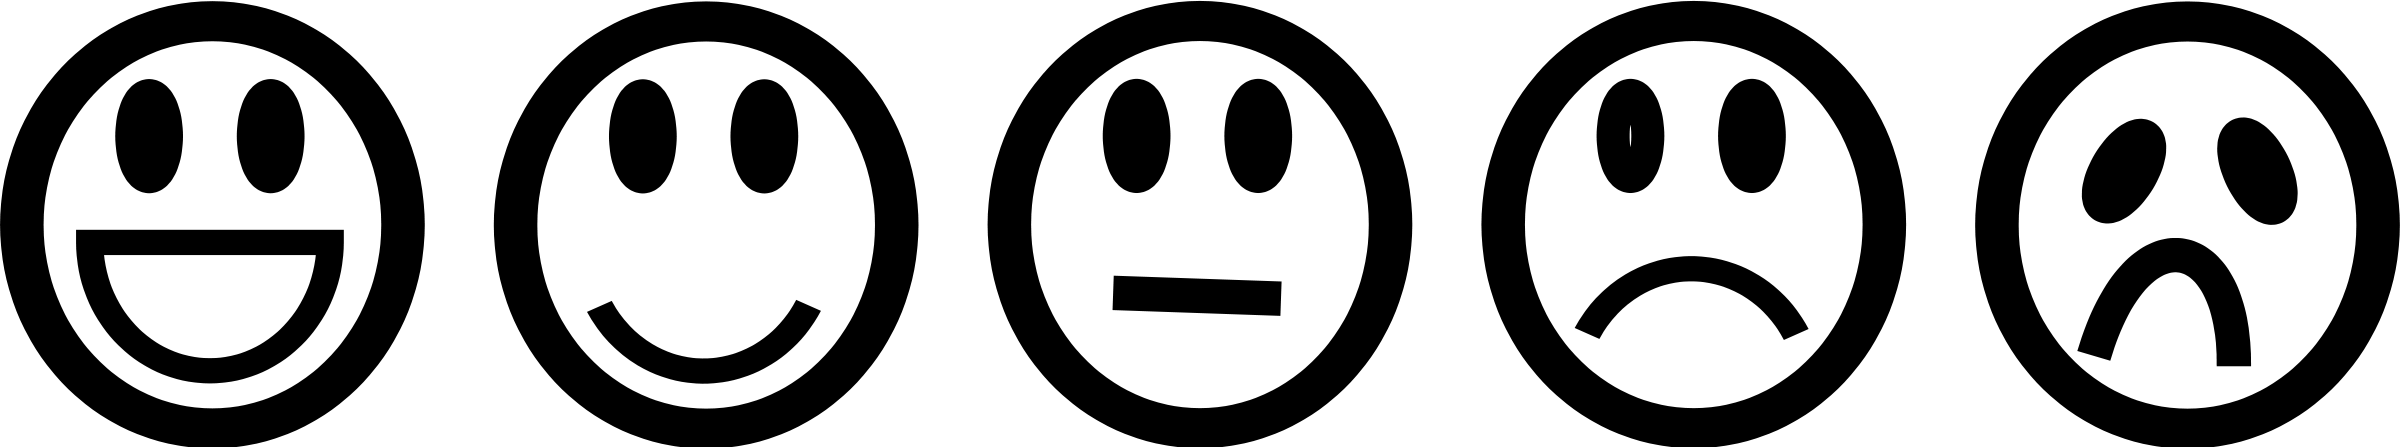 Pix For > Black And White Smiley Face Clip Art